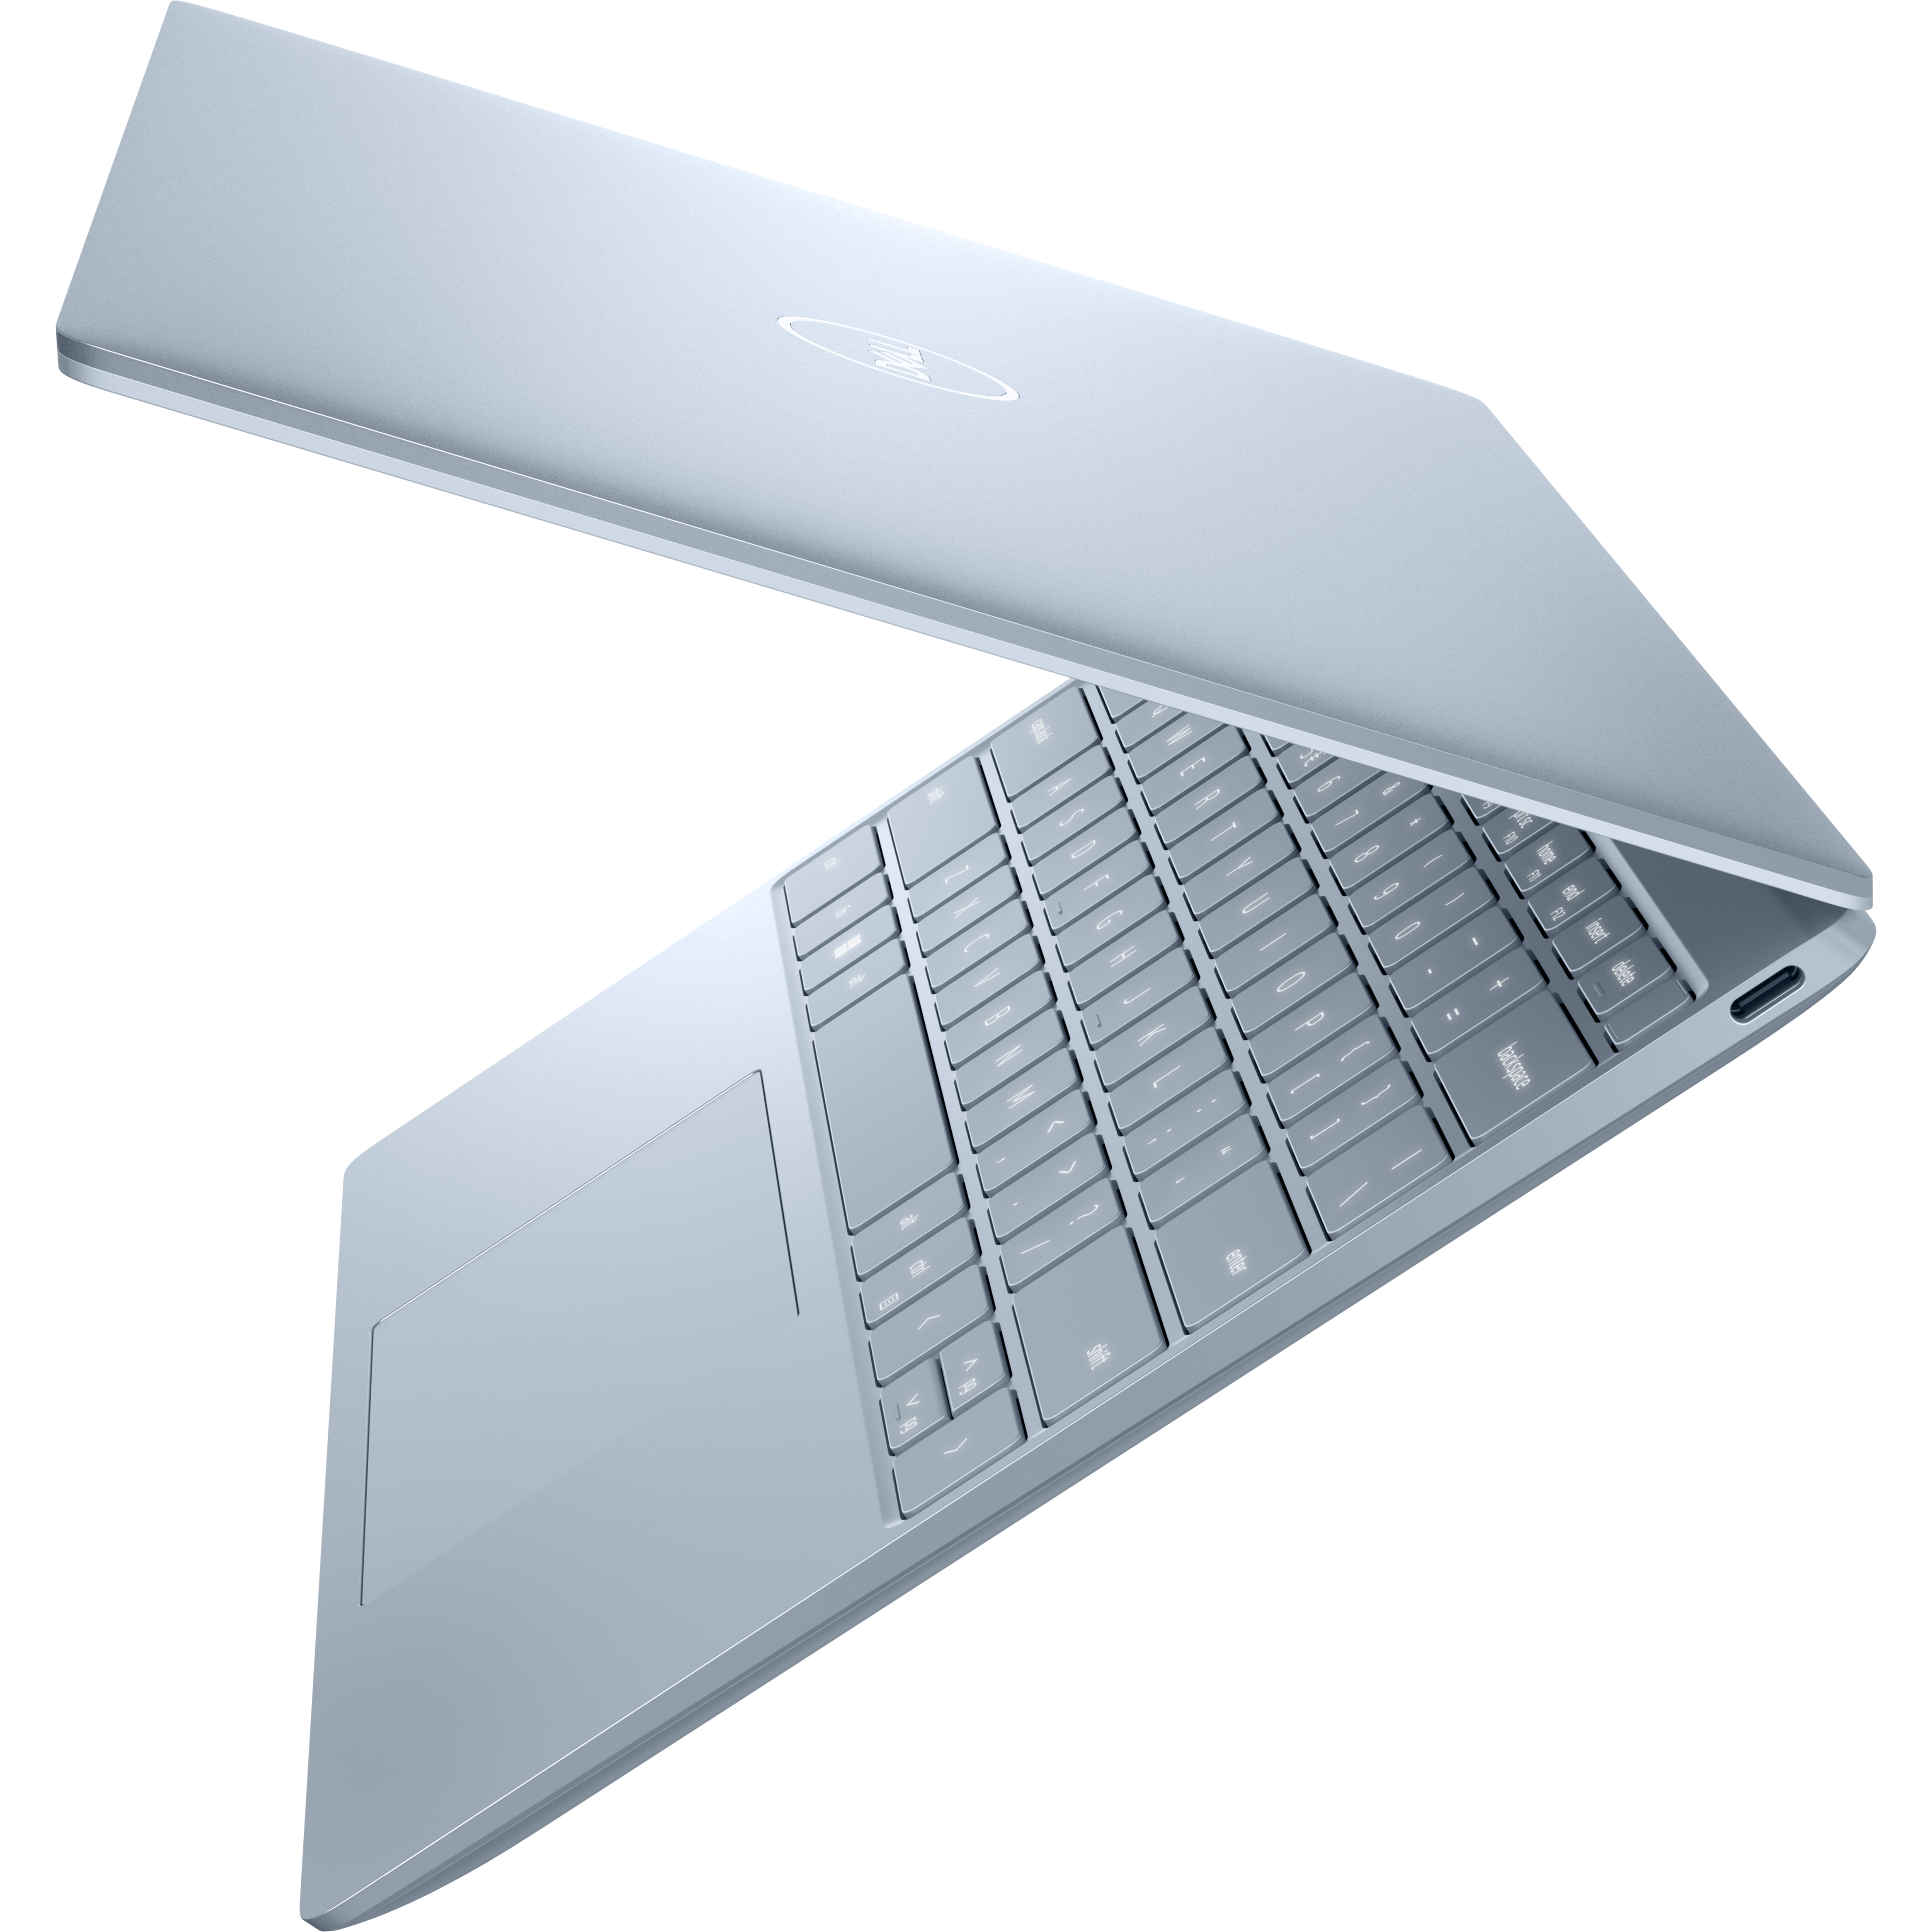 XPS 13 Laptop - Dell XPS 13-inch Laptop Computers | Dell USA